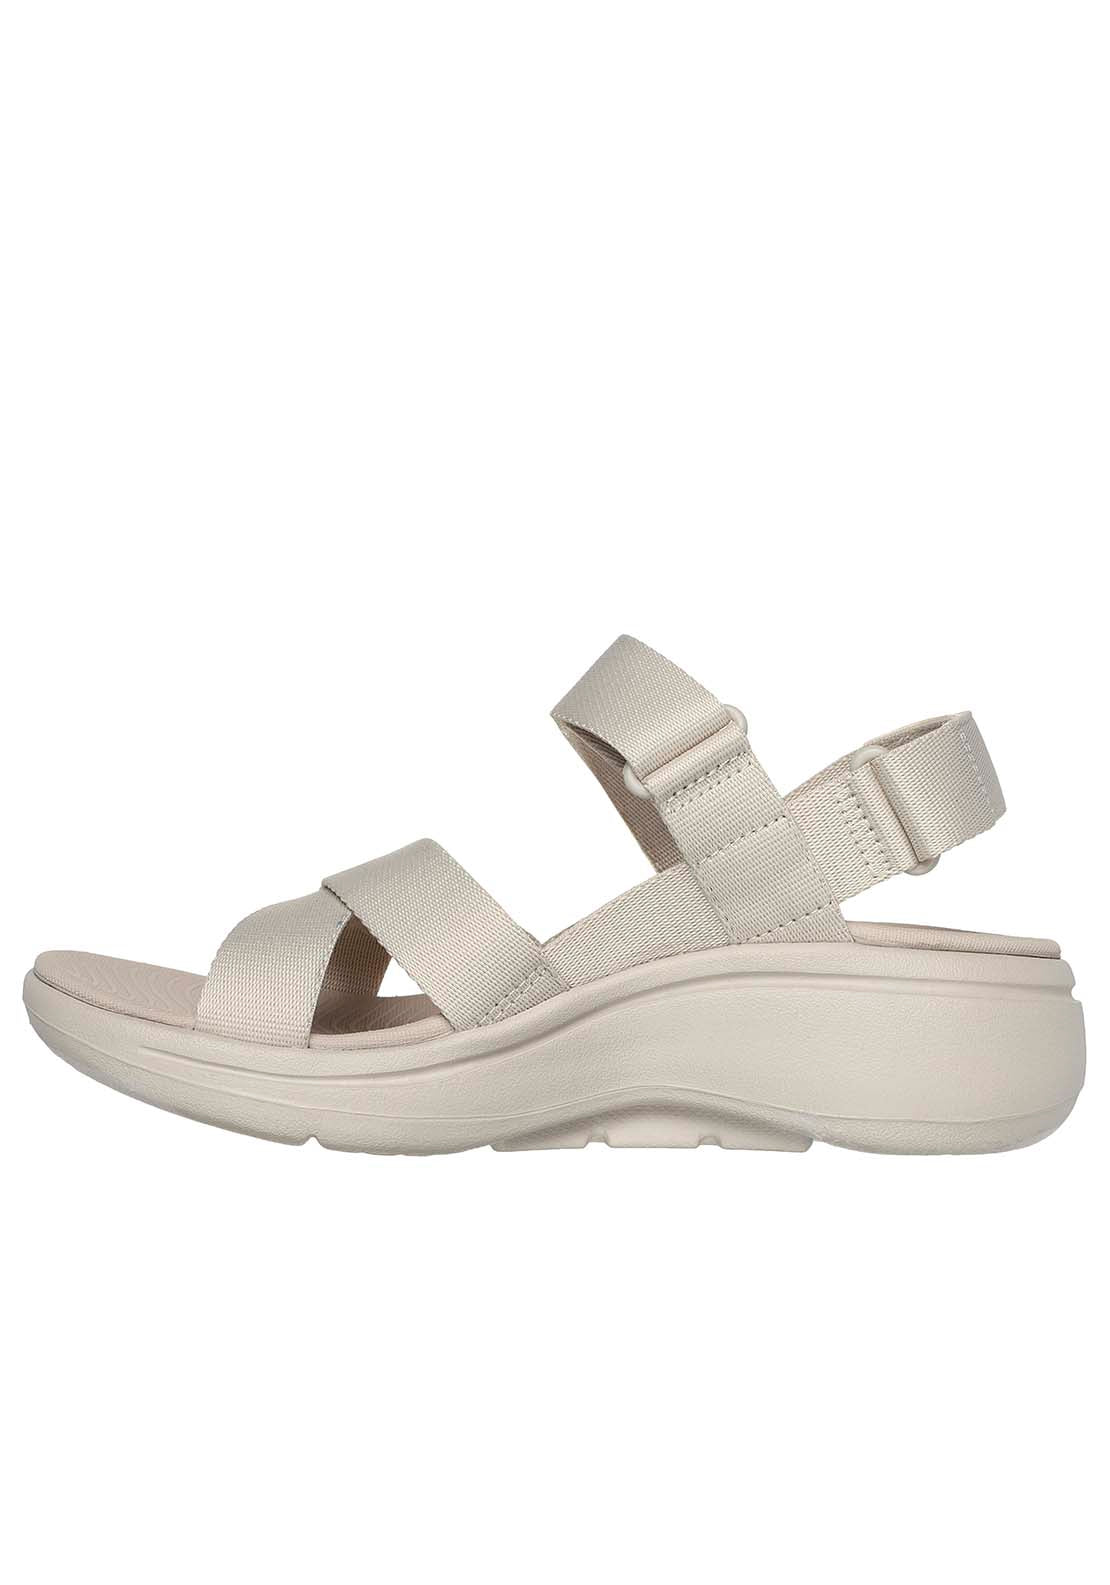 Skechers Go Walk Arch Fit Sandal 4 Shaws Department Stores